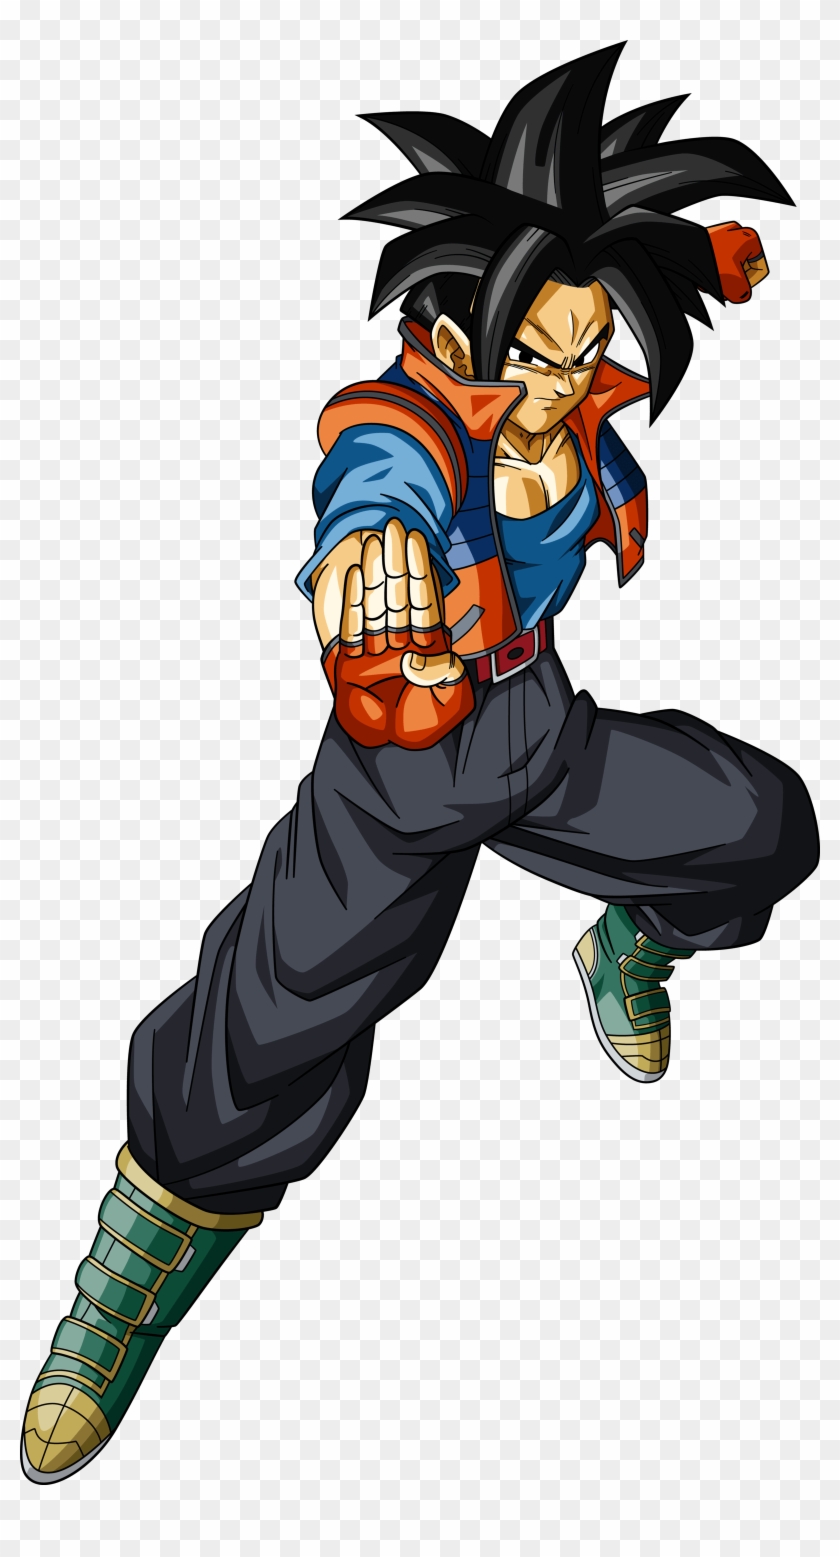 Dragon Planet Wiki Fandom Powered Wikia Made Up Dragon Ball Z Character Hd Png Download 1600x2890 4862481 Pngfind